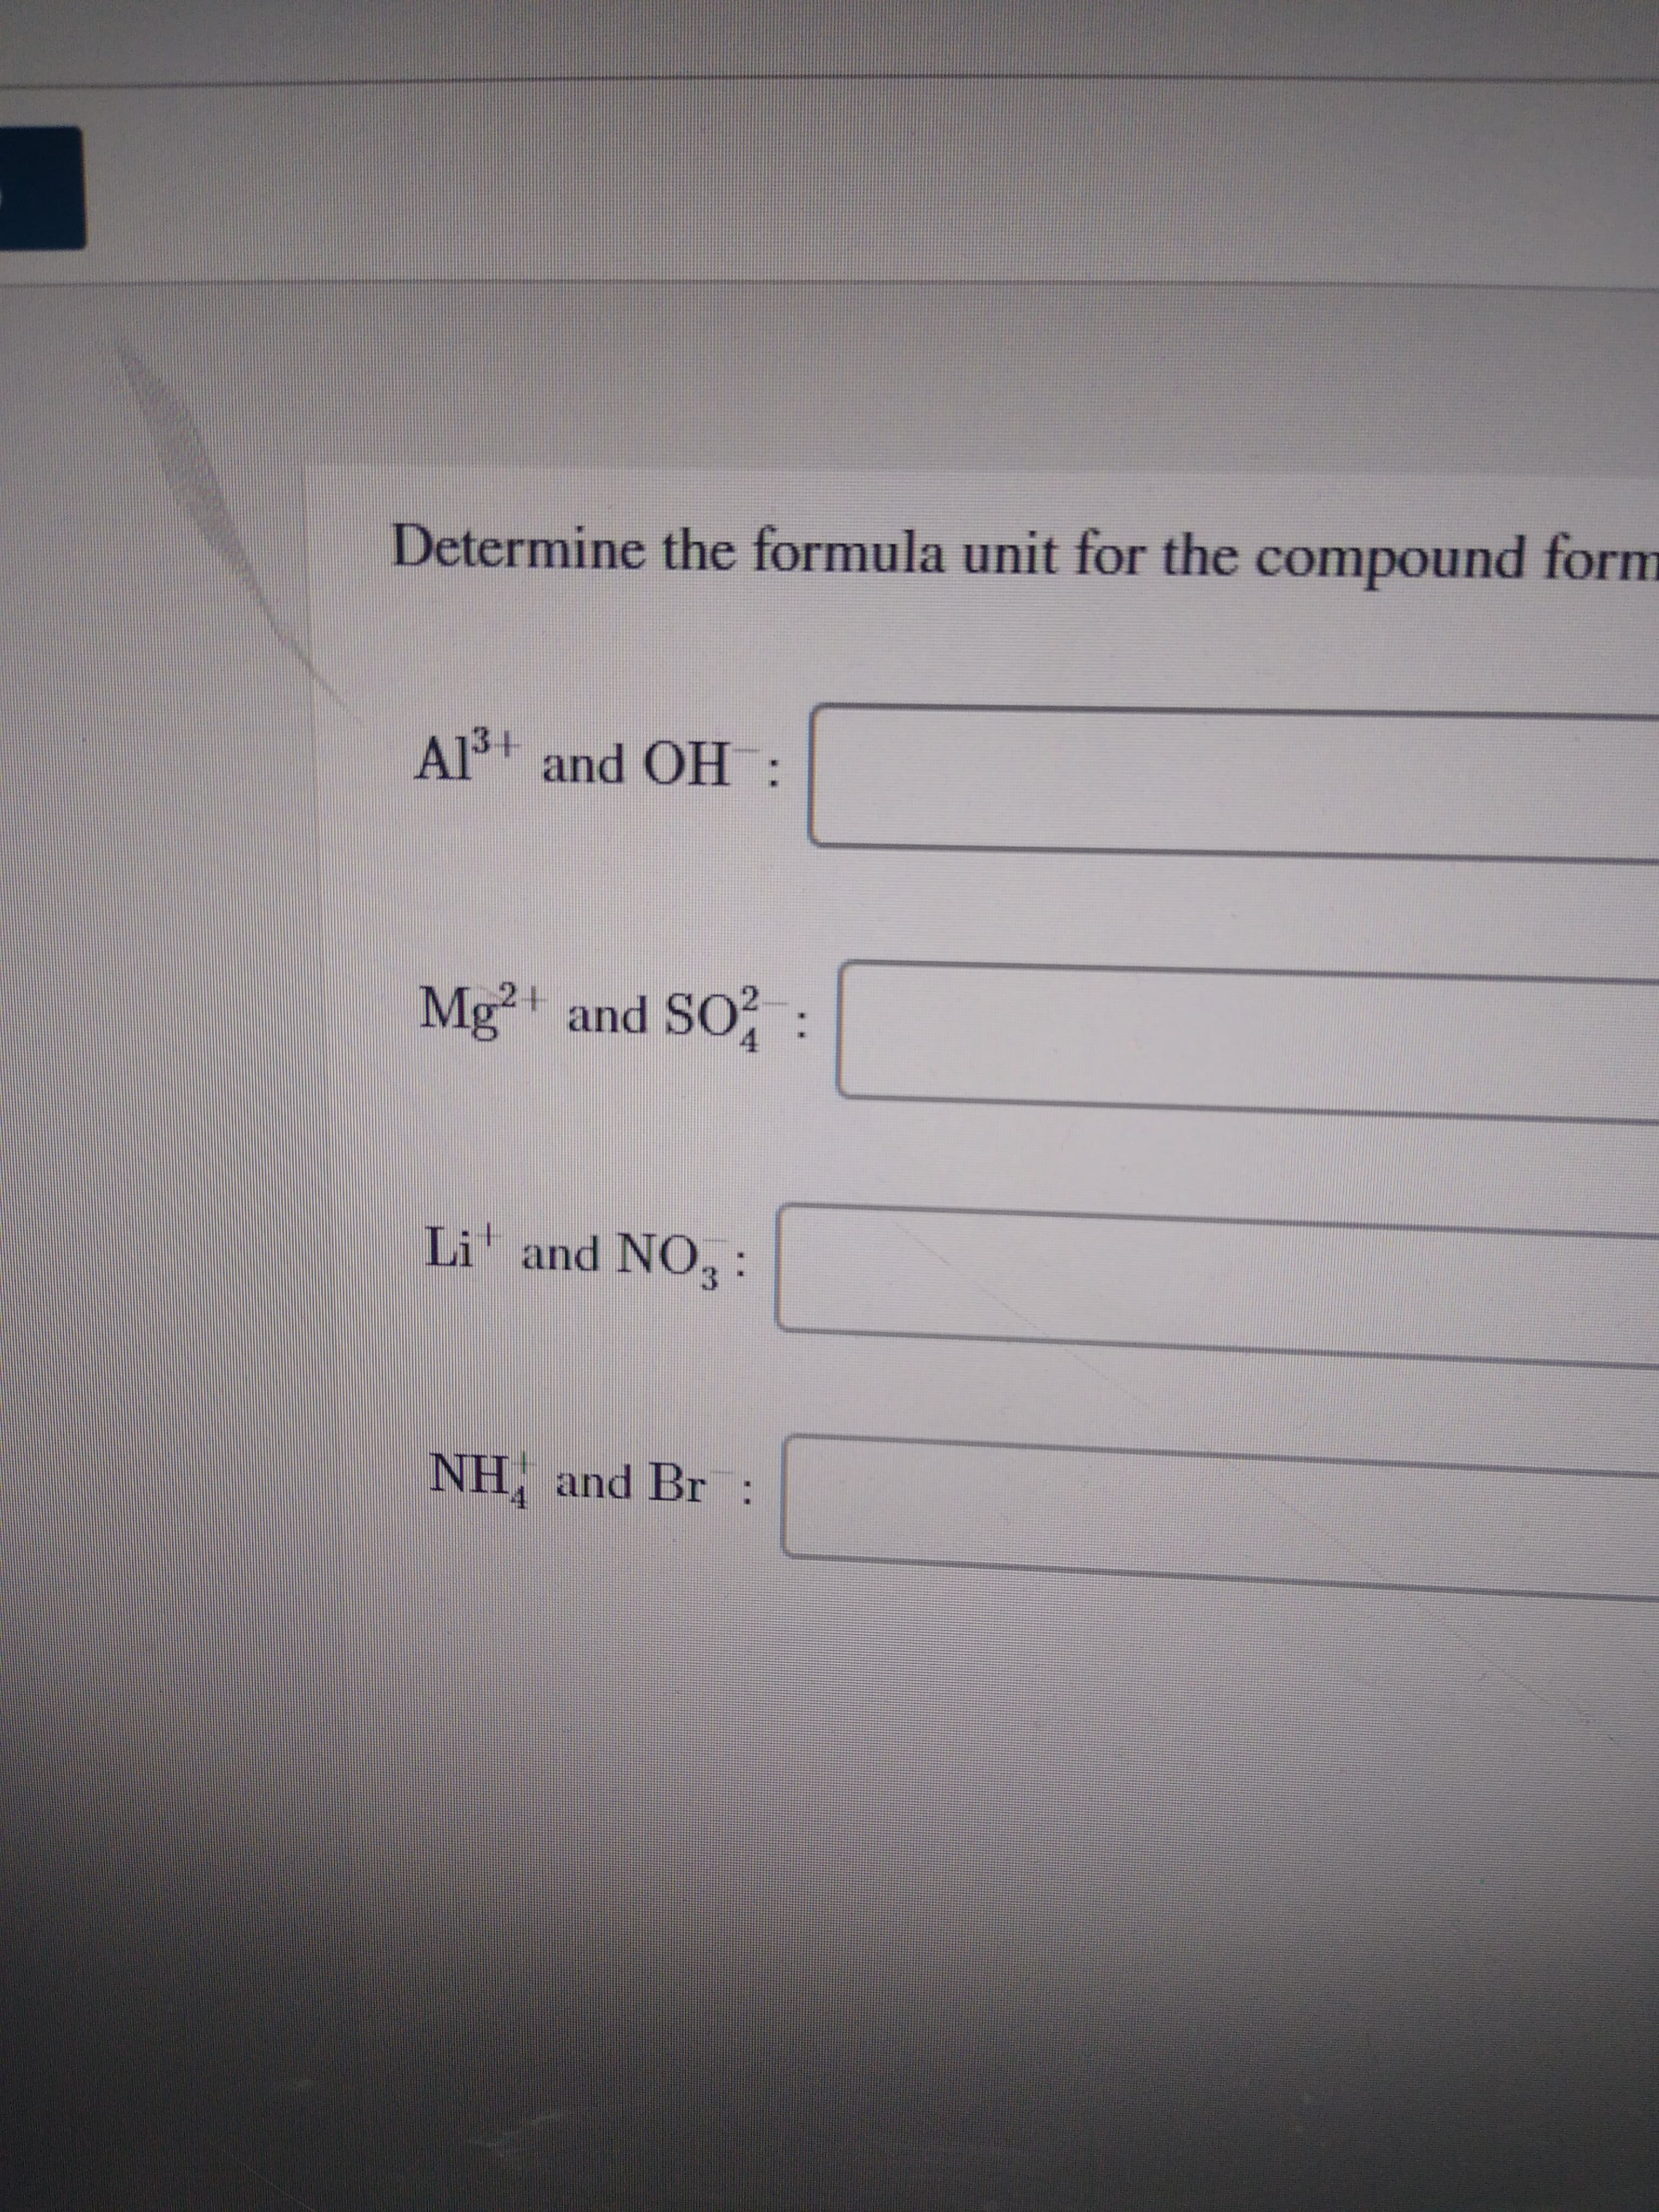 Determine the formula unit for the compound form
Al3+ and OH:
Mg²+ and SO? :
Li and NO, :
NH, and Br:
4
